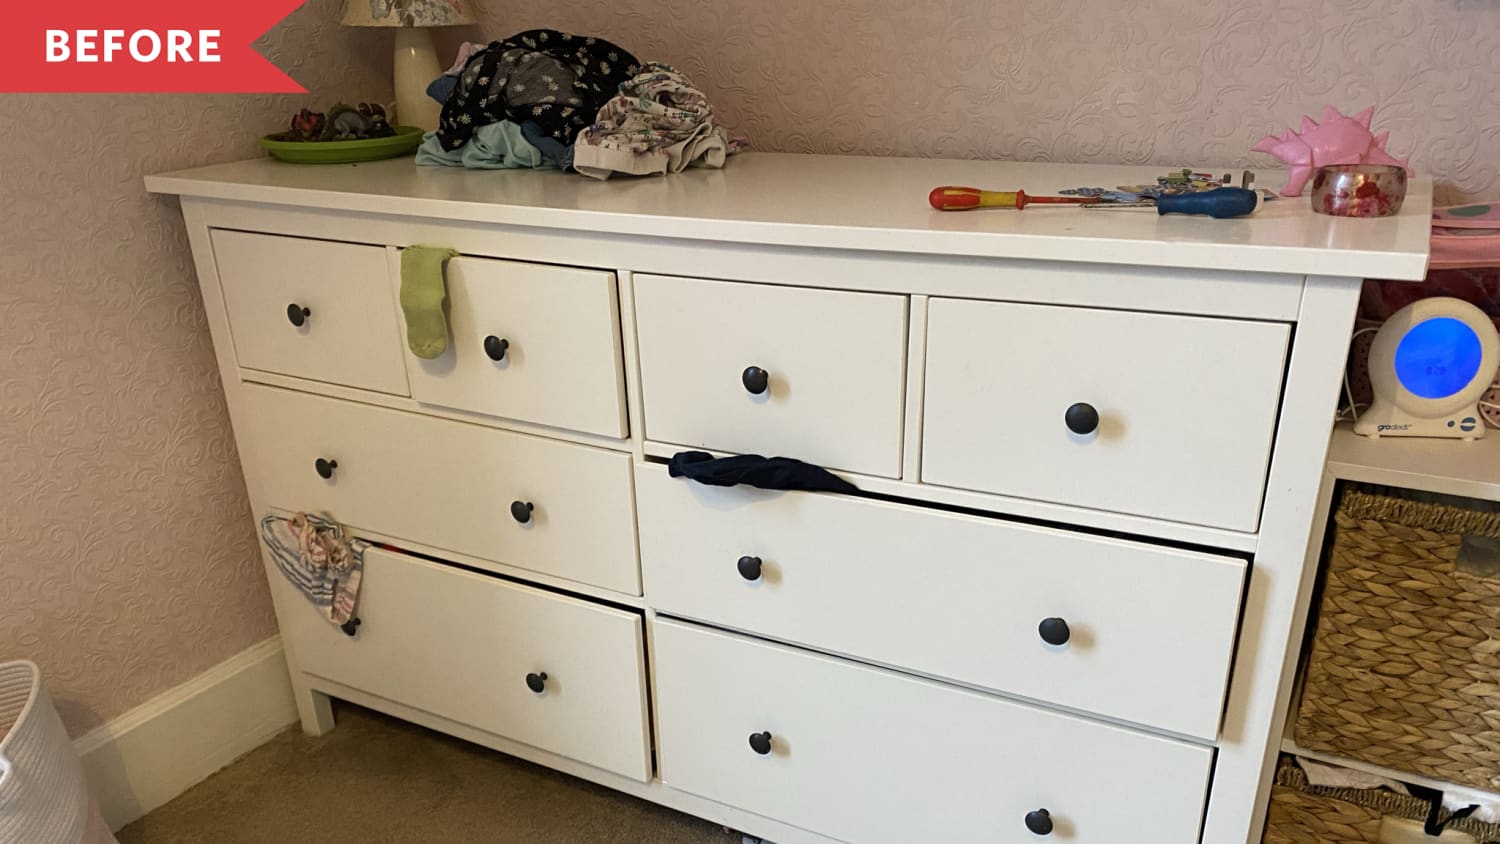 Bijdragen knop Auto IKEA HEMNES Painted Redo - Before and After Photos | Apartment Therapy